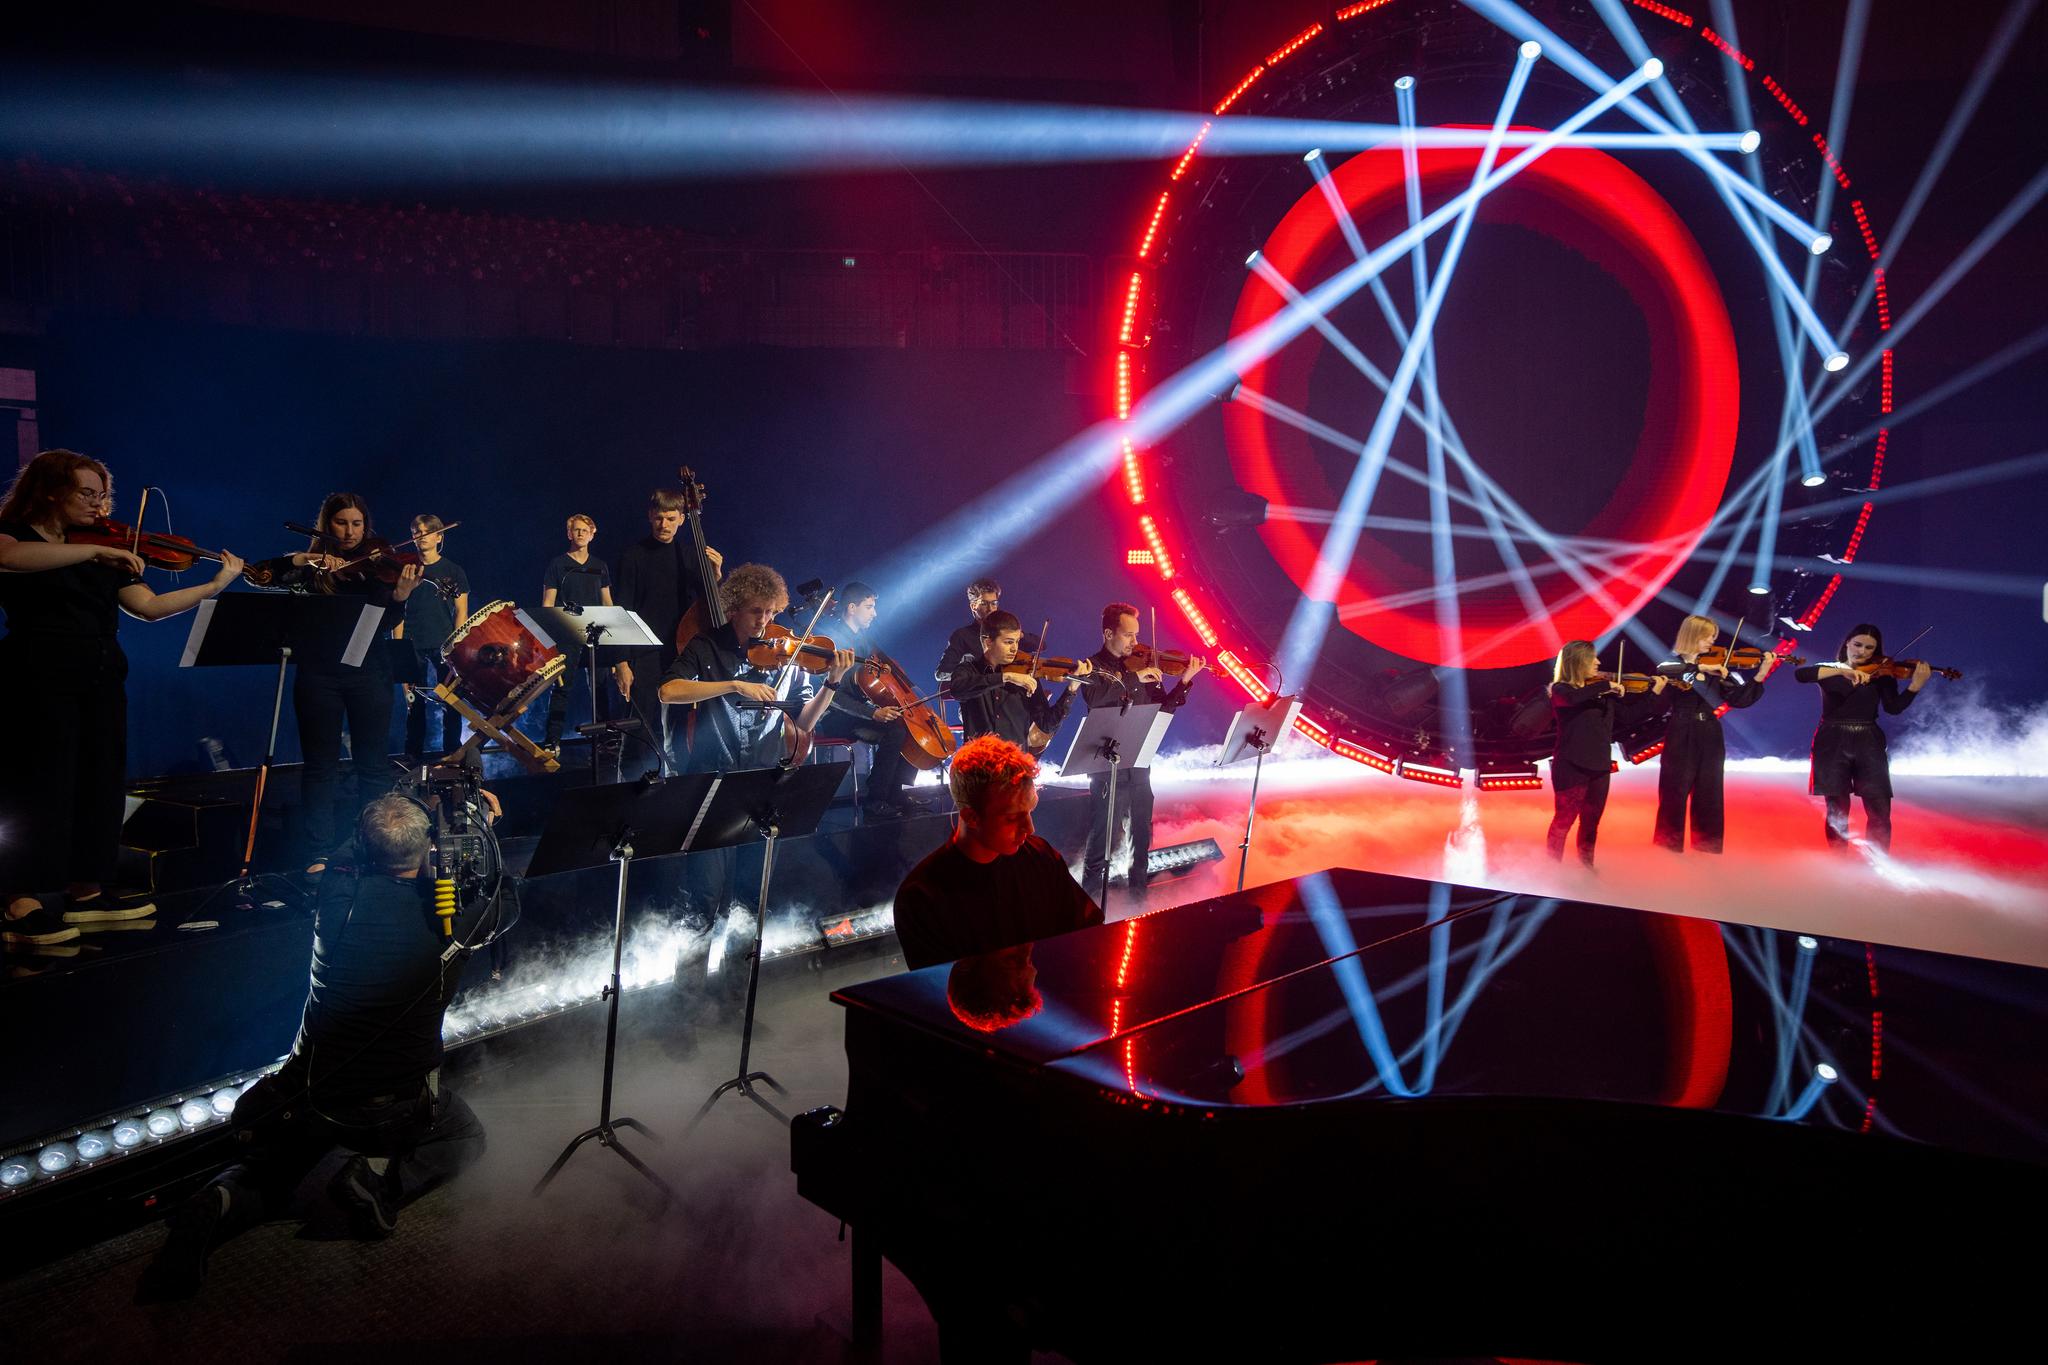 The 16 piece orchestra performs in front of the light installation.